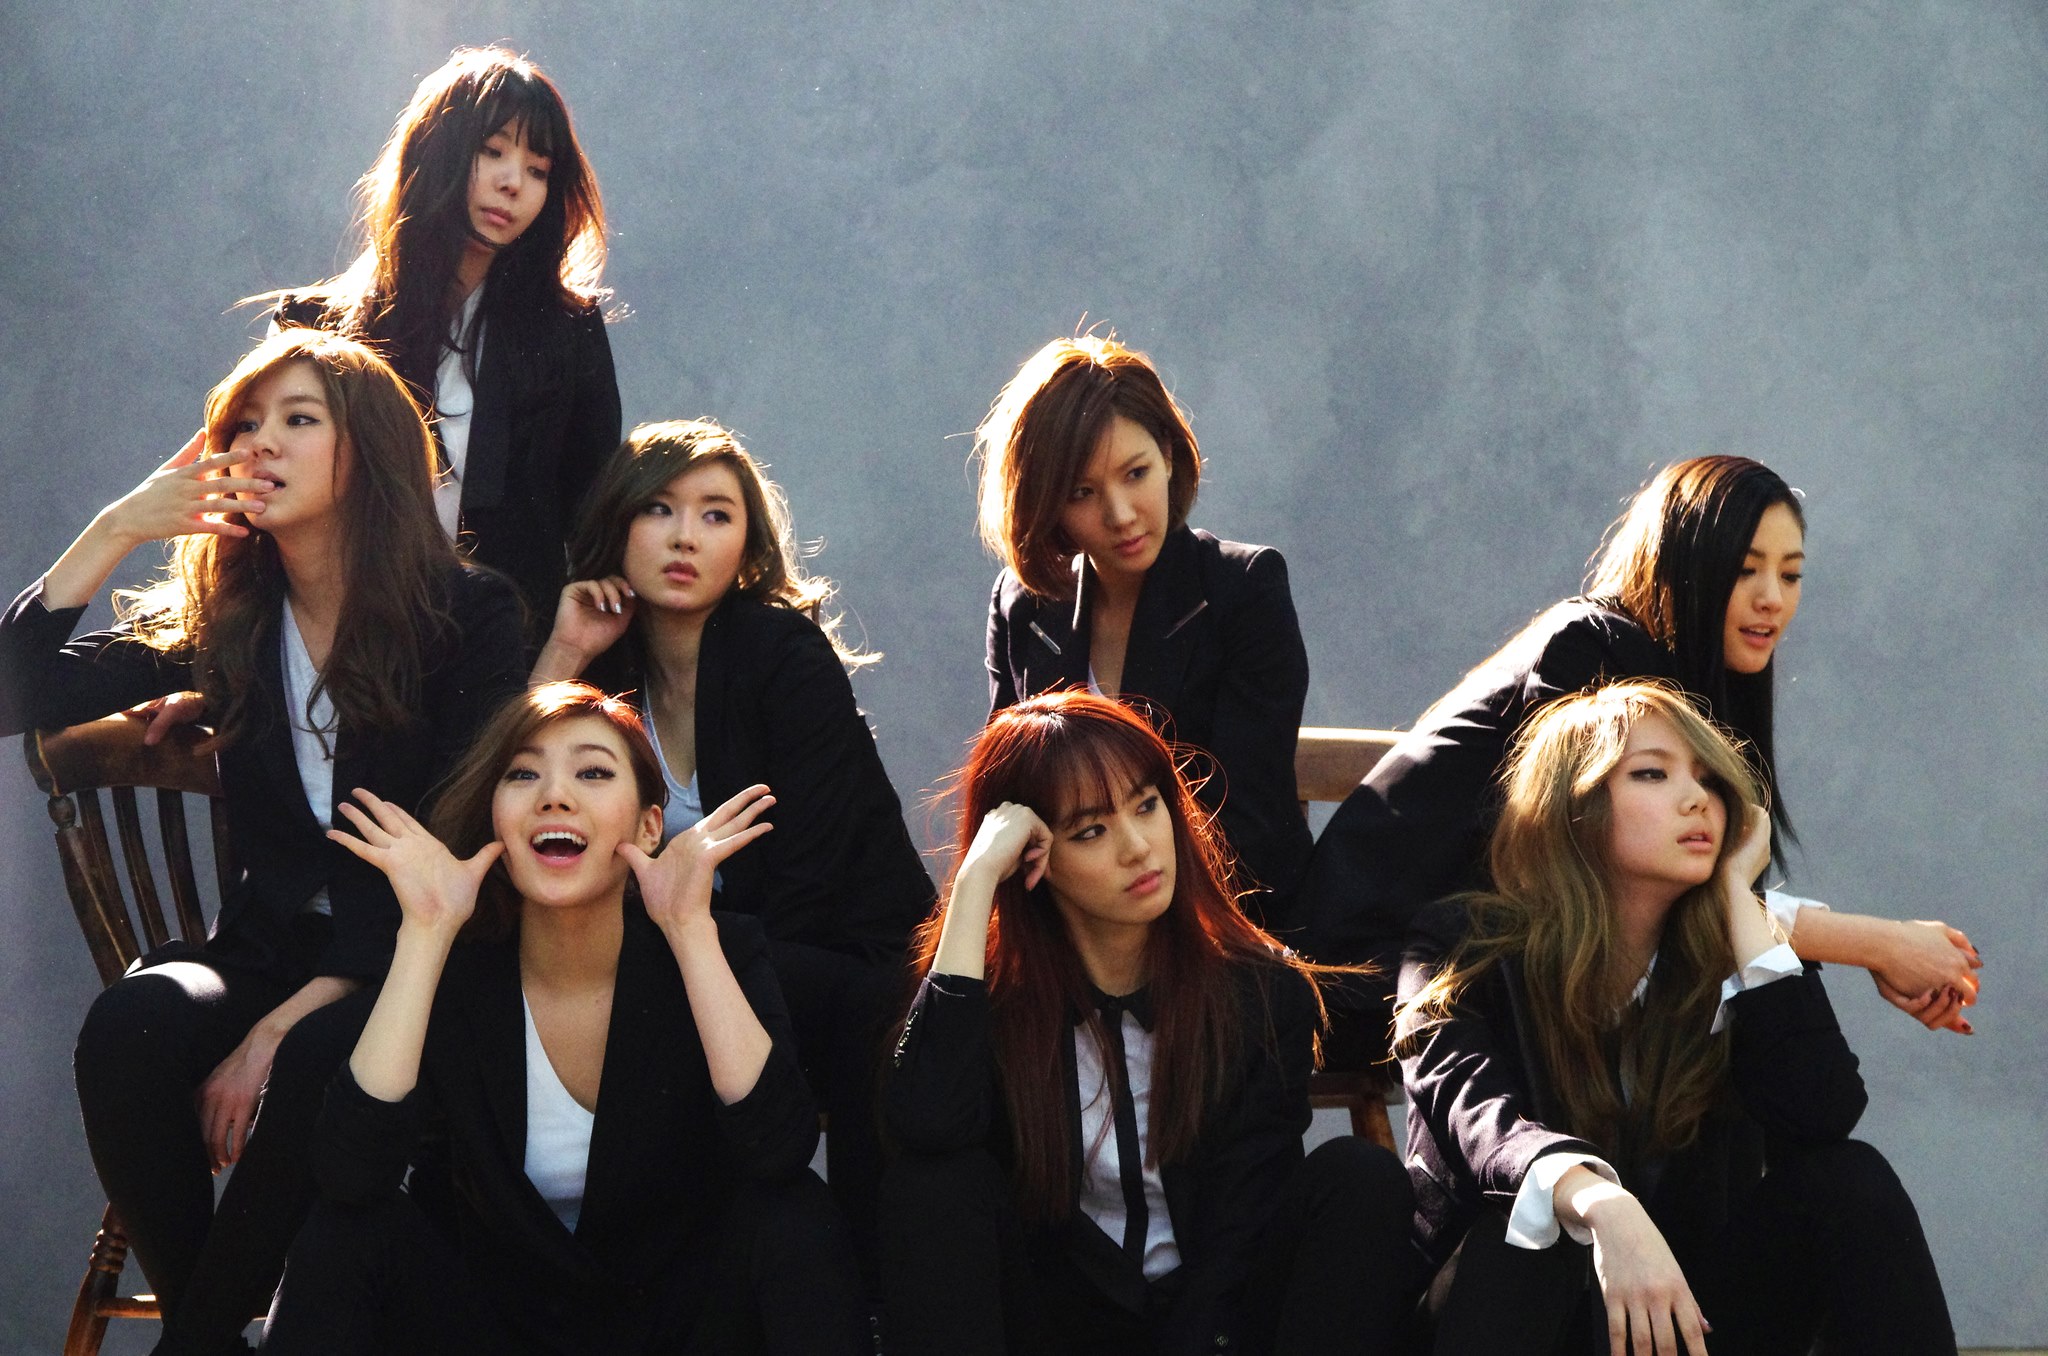 After School Image Shh HD Wallpaper And